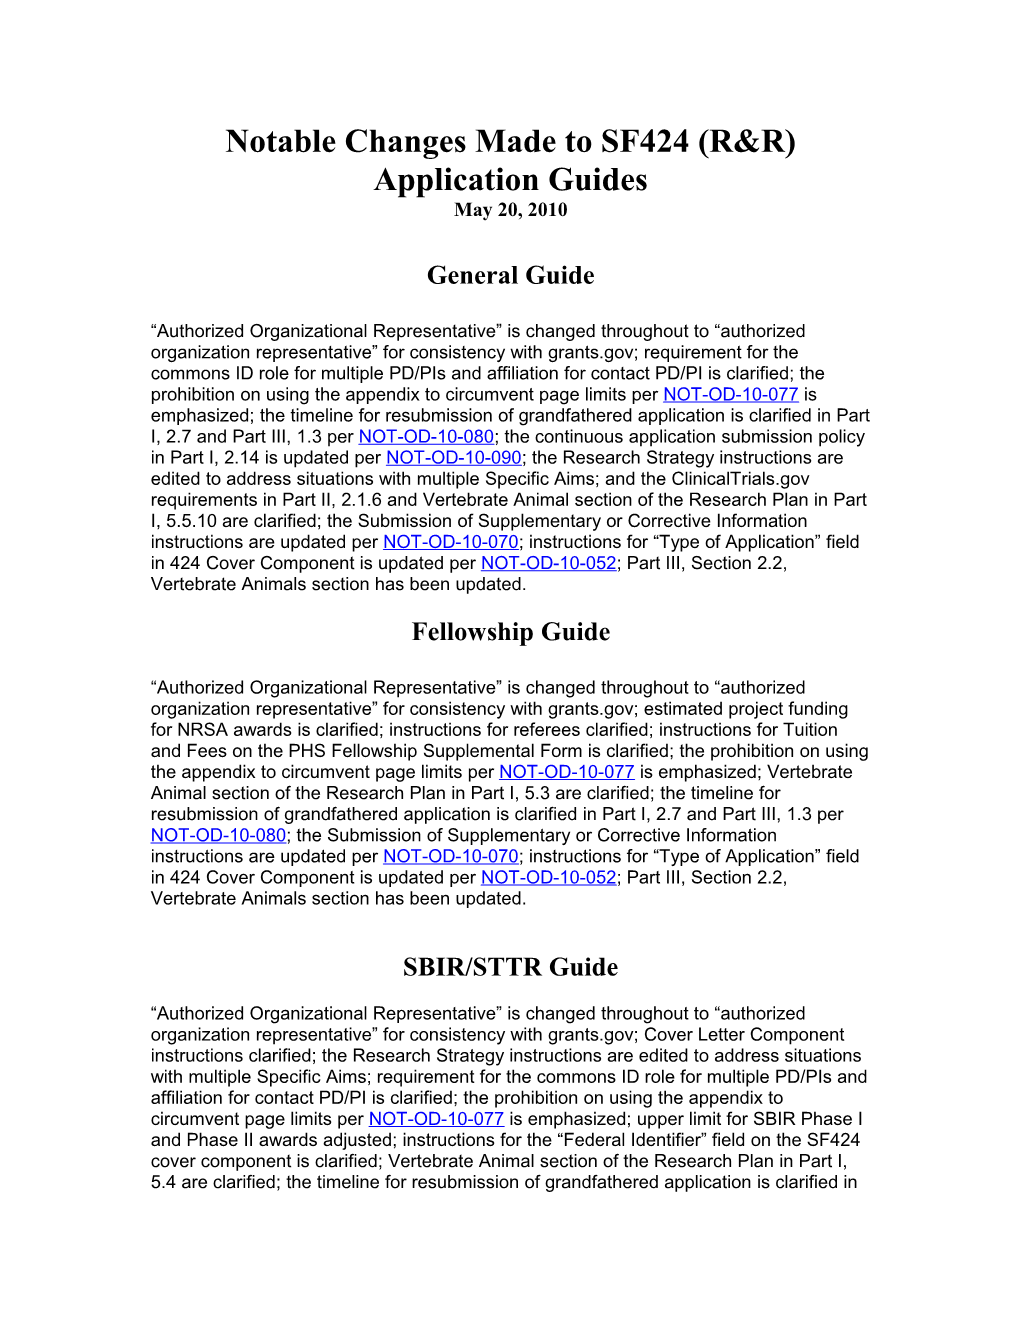 Notable Changes Made to SF424 (R&R) Application Guides - May 20, 2010